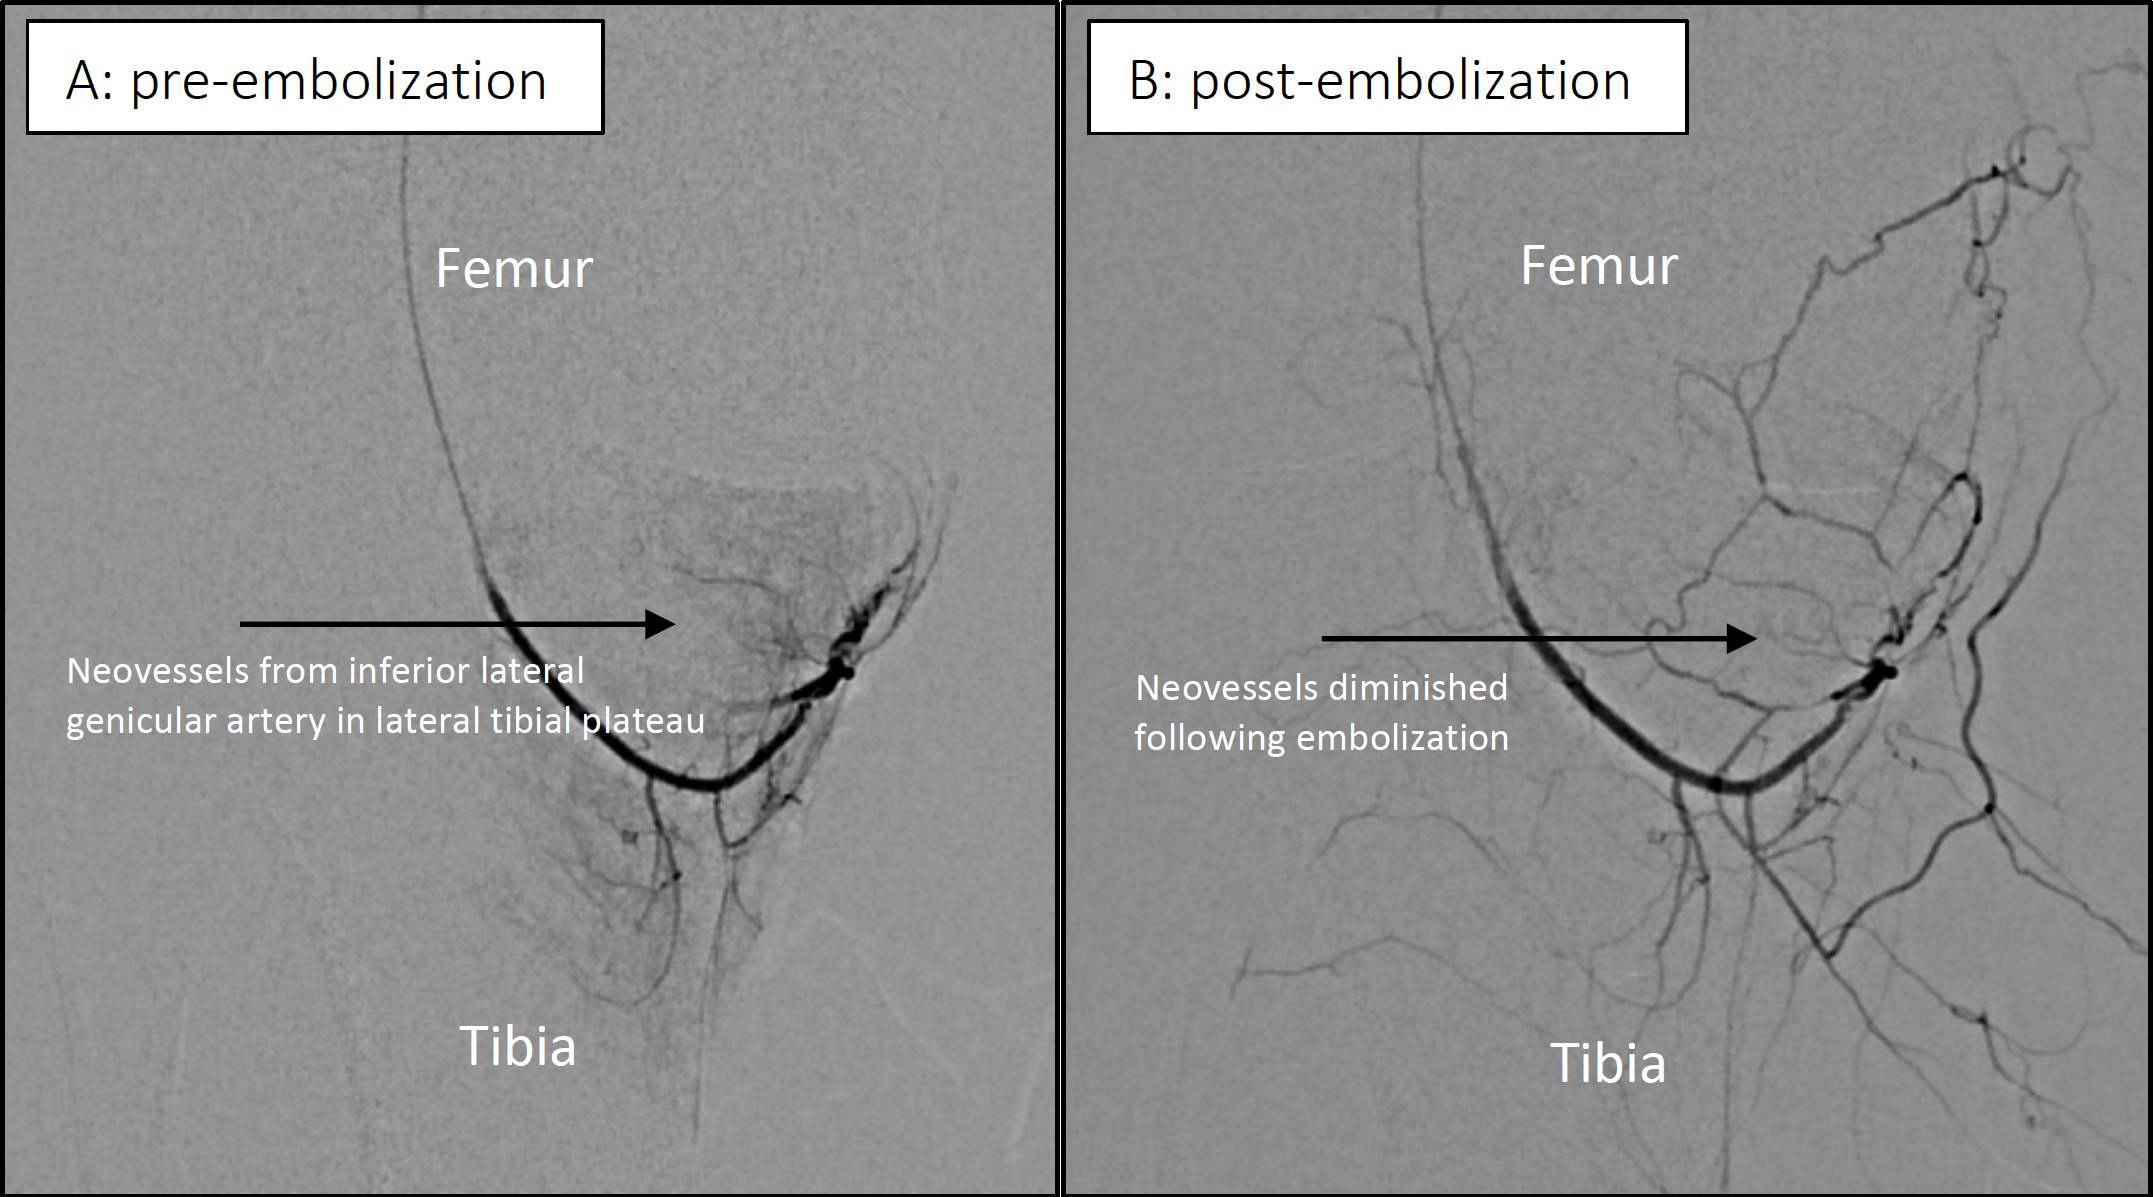 Fig. 1 
            Angiological findings a) before and b) after transcatheter arterial embolization. Pre-embolization findings demonstrate extensive neovasculature in the lateral tibial condyle that is absent postembolization.
          